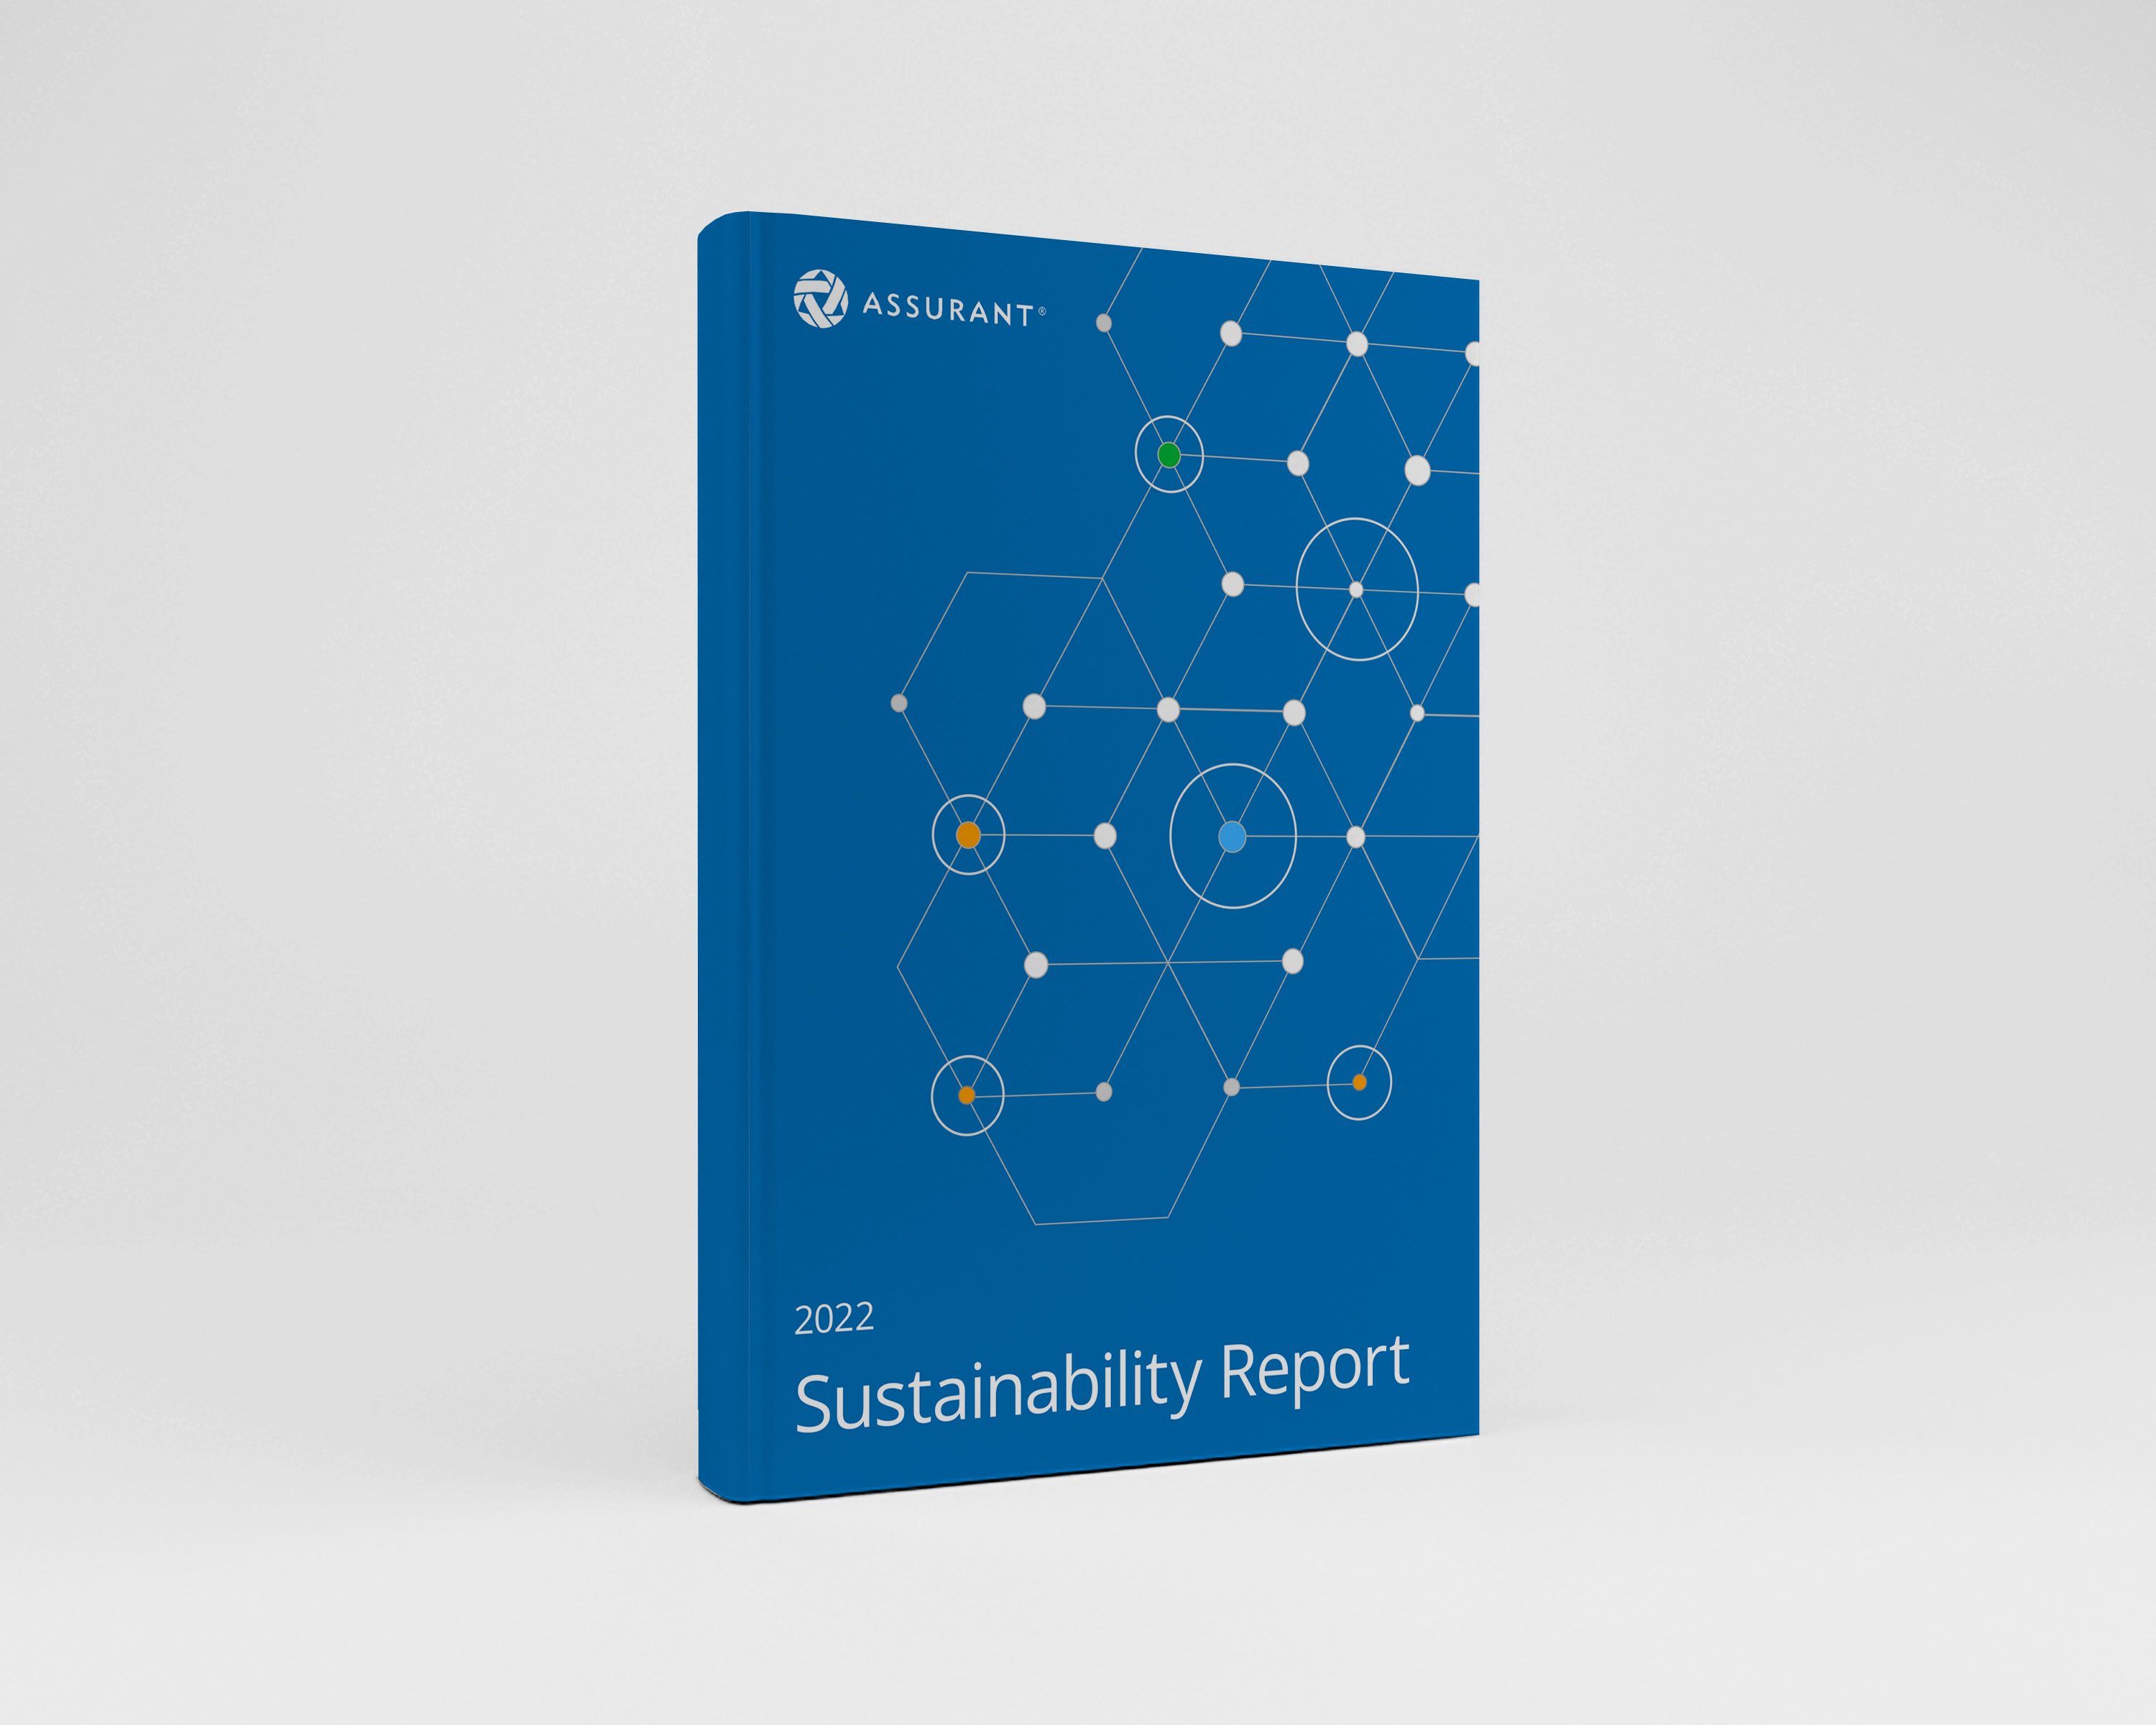 Image of a blue book cover detailing the 2022 Sustainability Report